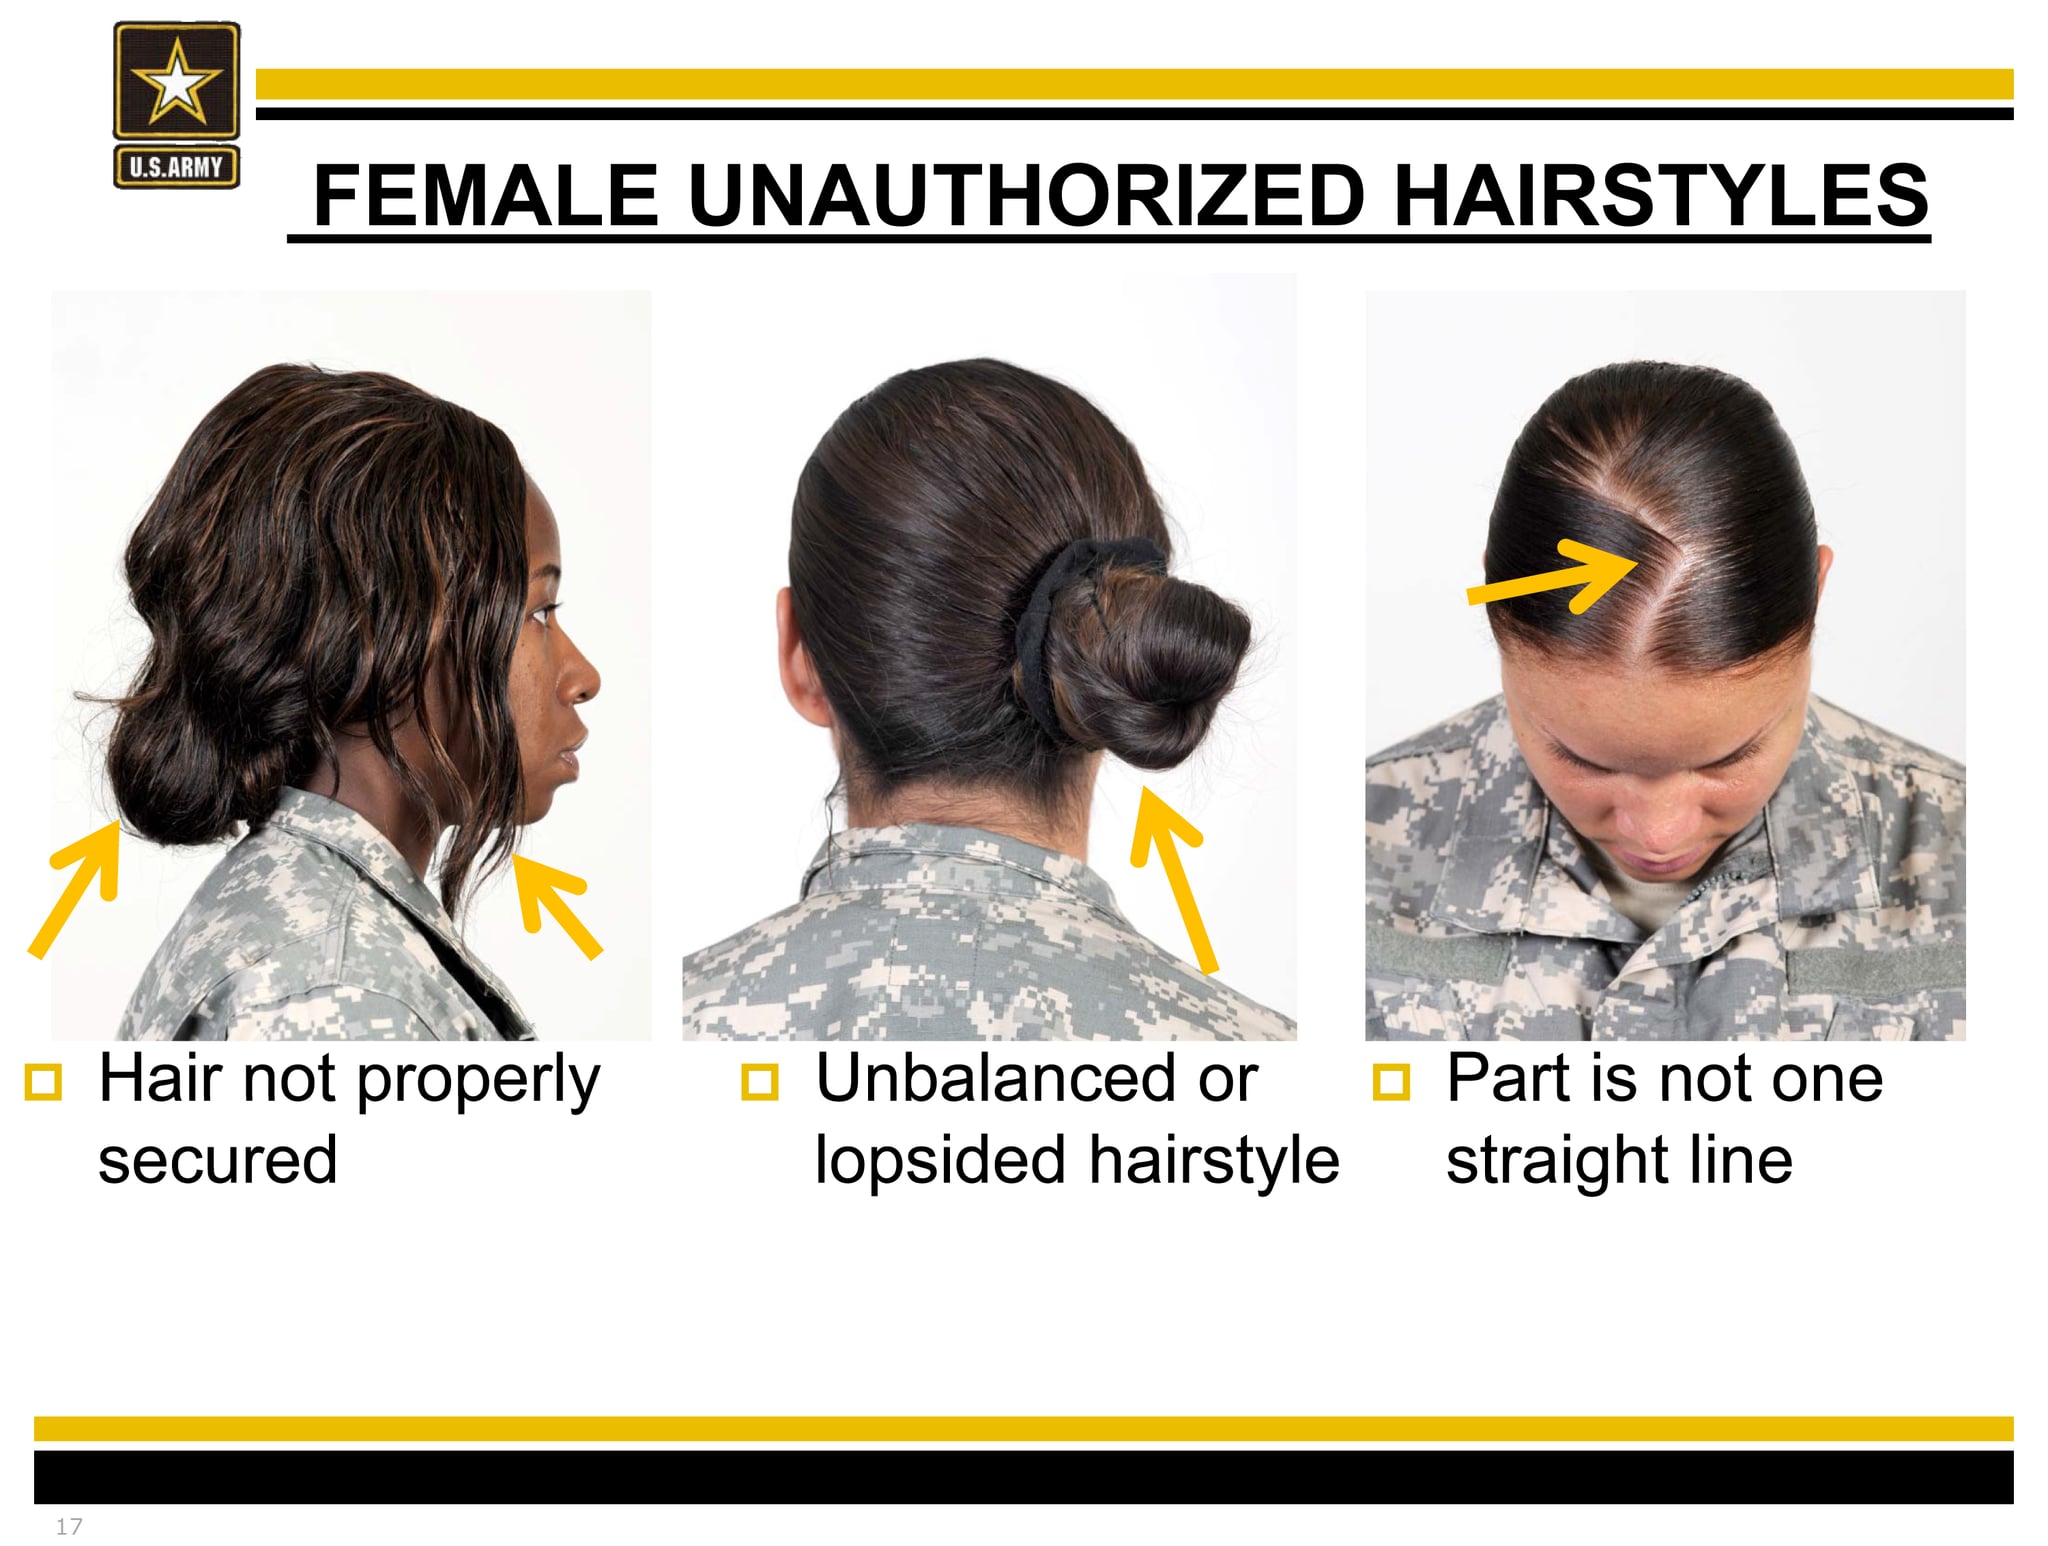 Women With Natural Hair Petition Army Regulation 670-1 | POPSUGAR Beauty